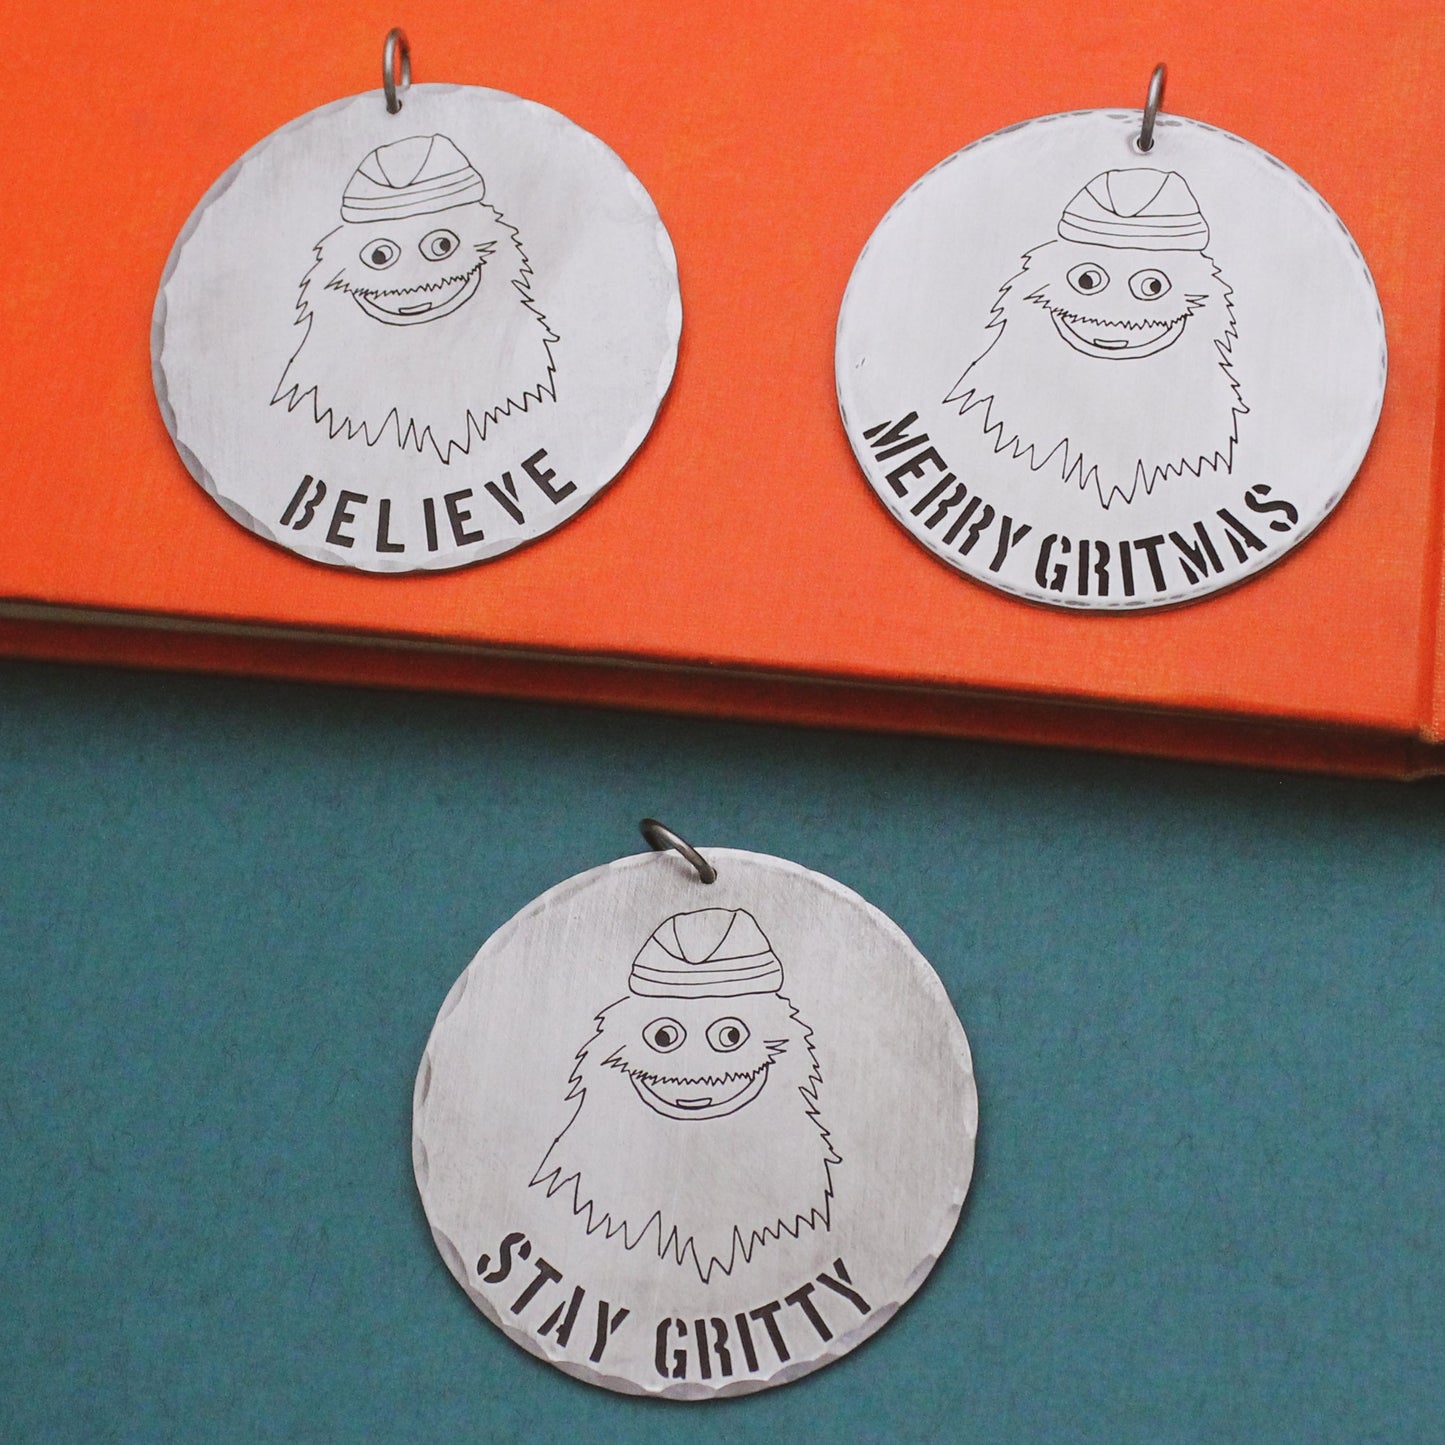 Philadelphia Gritty Christmas Ornament Personalized Aluminum, Merry Gritmas Gritty ornament, Flyers Gritty Cute Ornament, Philadelphia Love